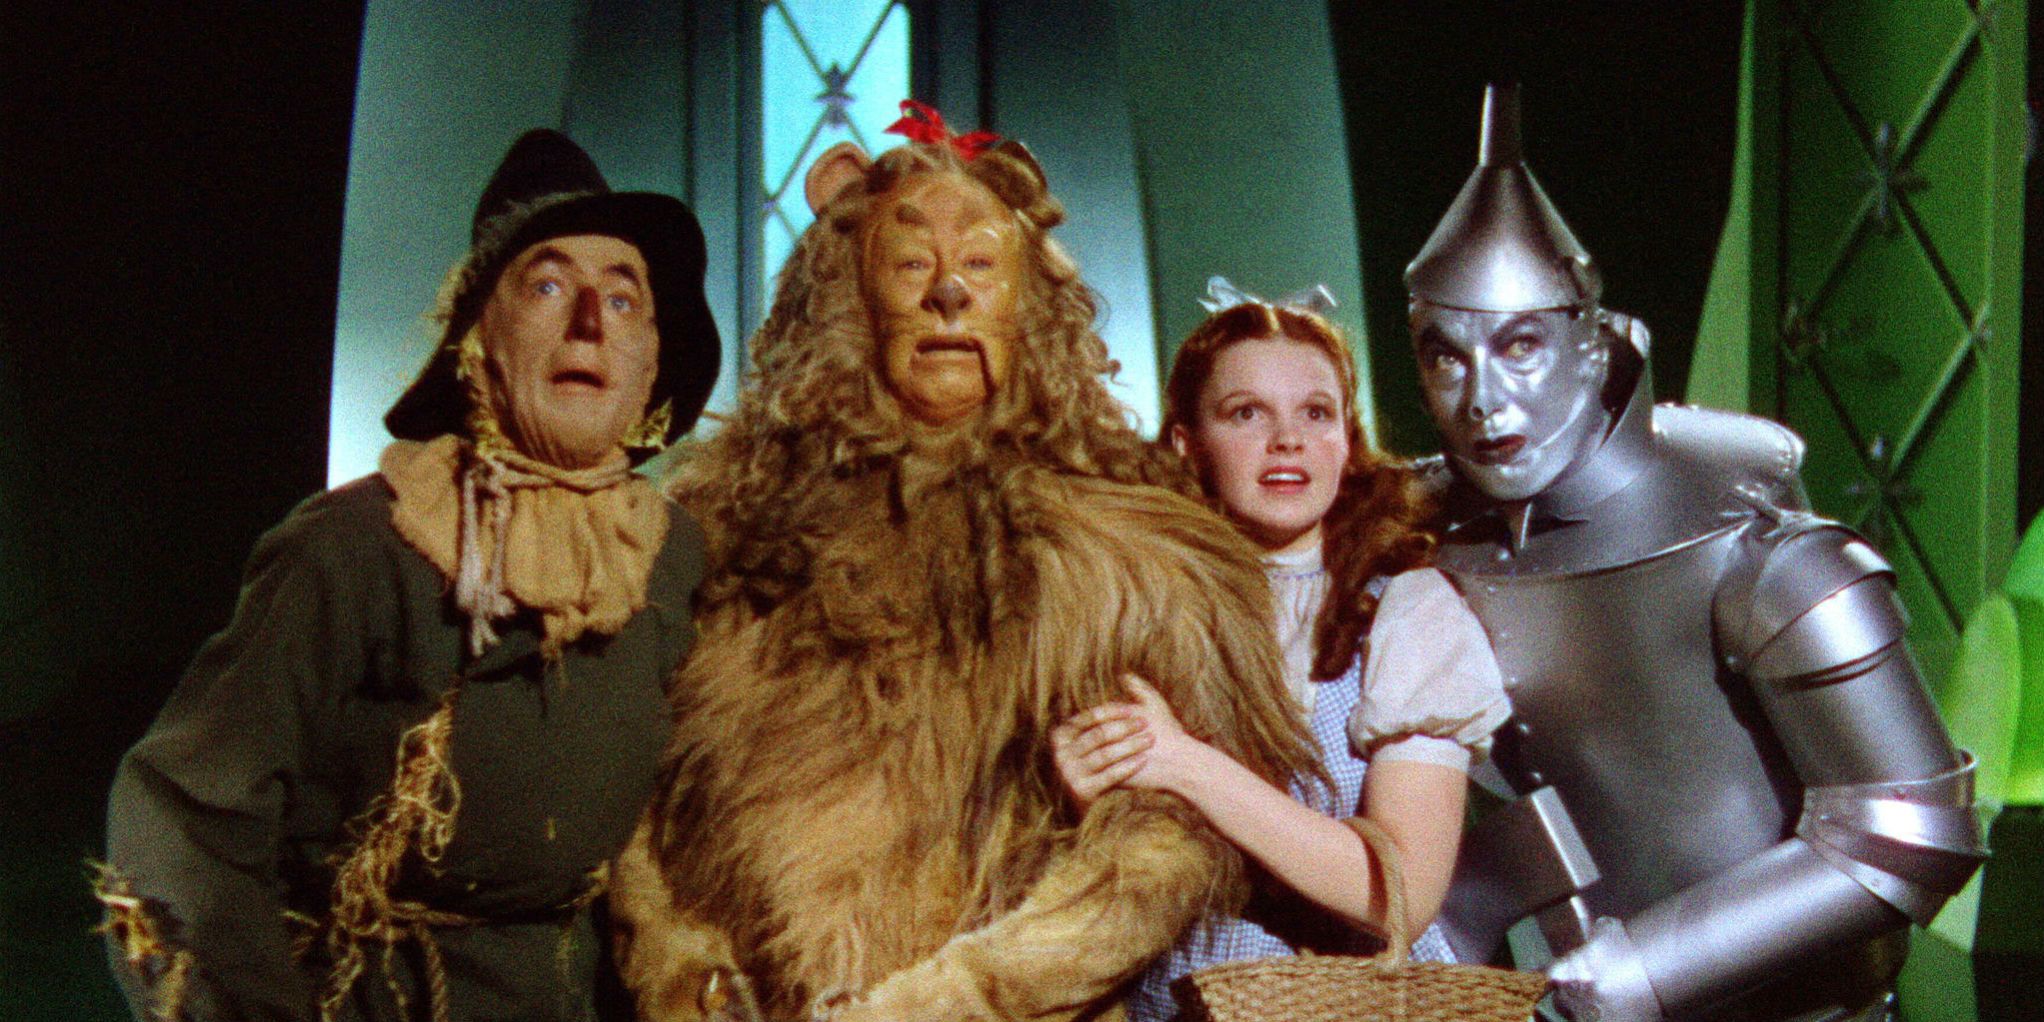 The Scarecrow, Lion, Dorothy, and Tin Man in The Wizard of Oz